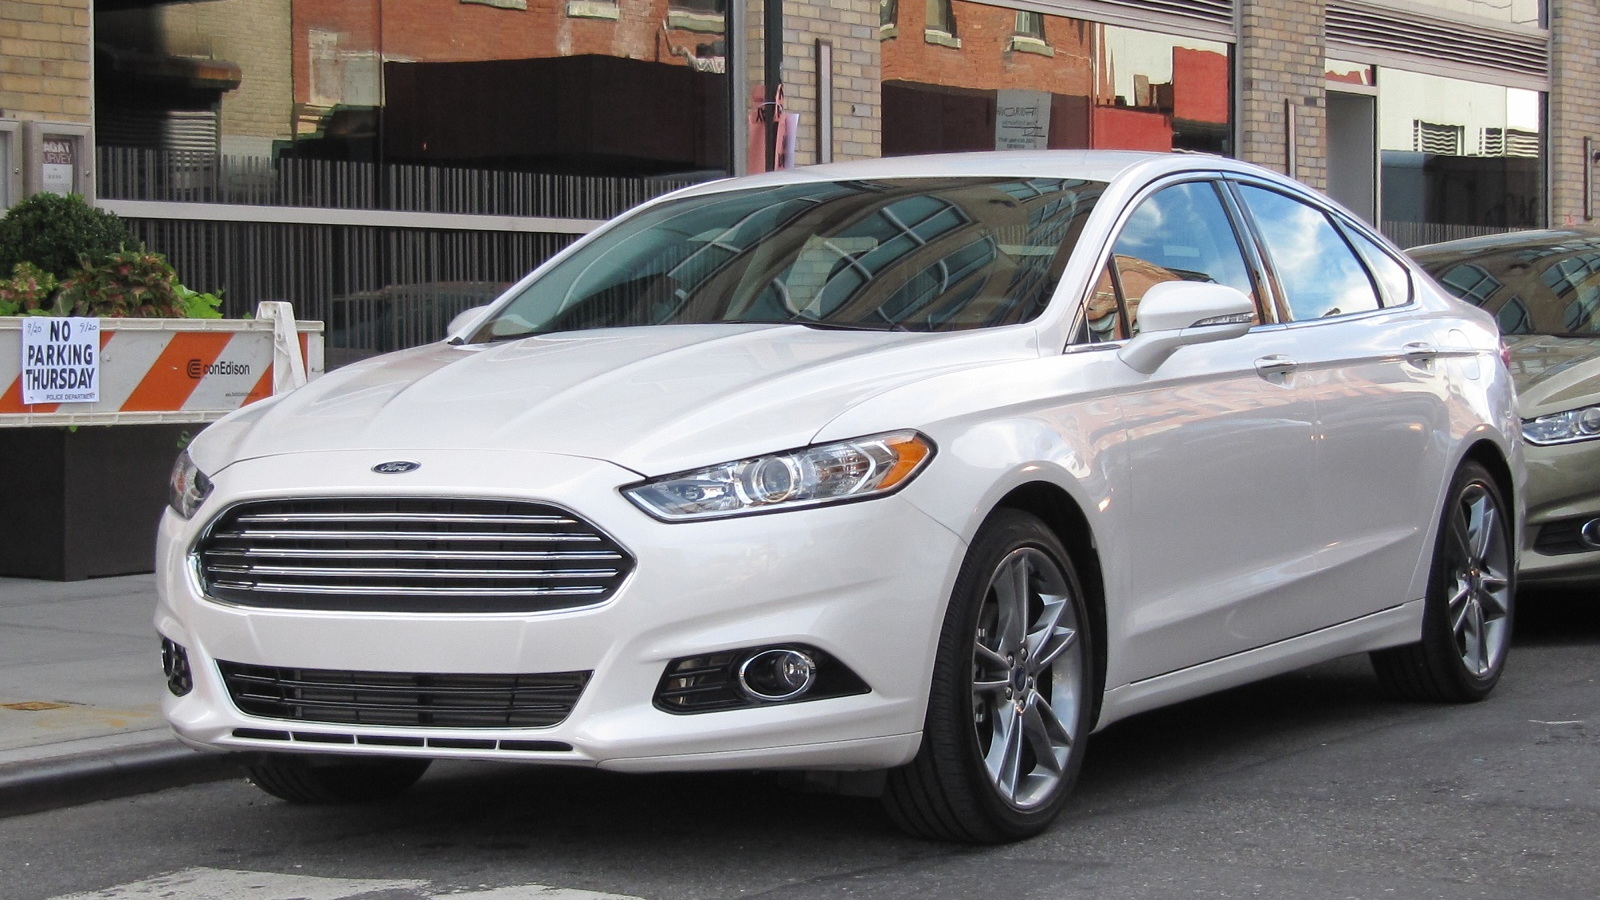 2013 Ford Fusion, New York City